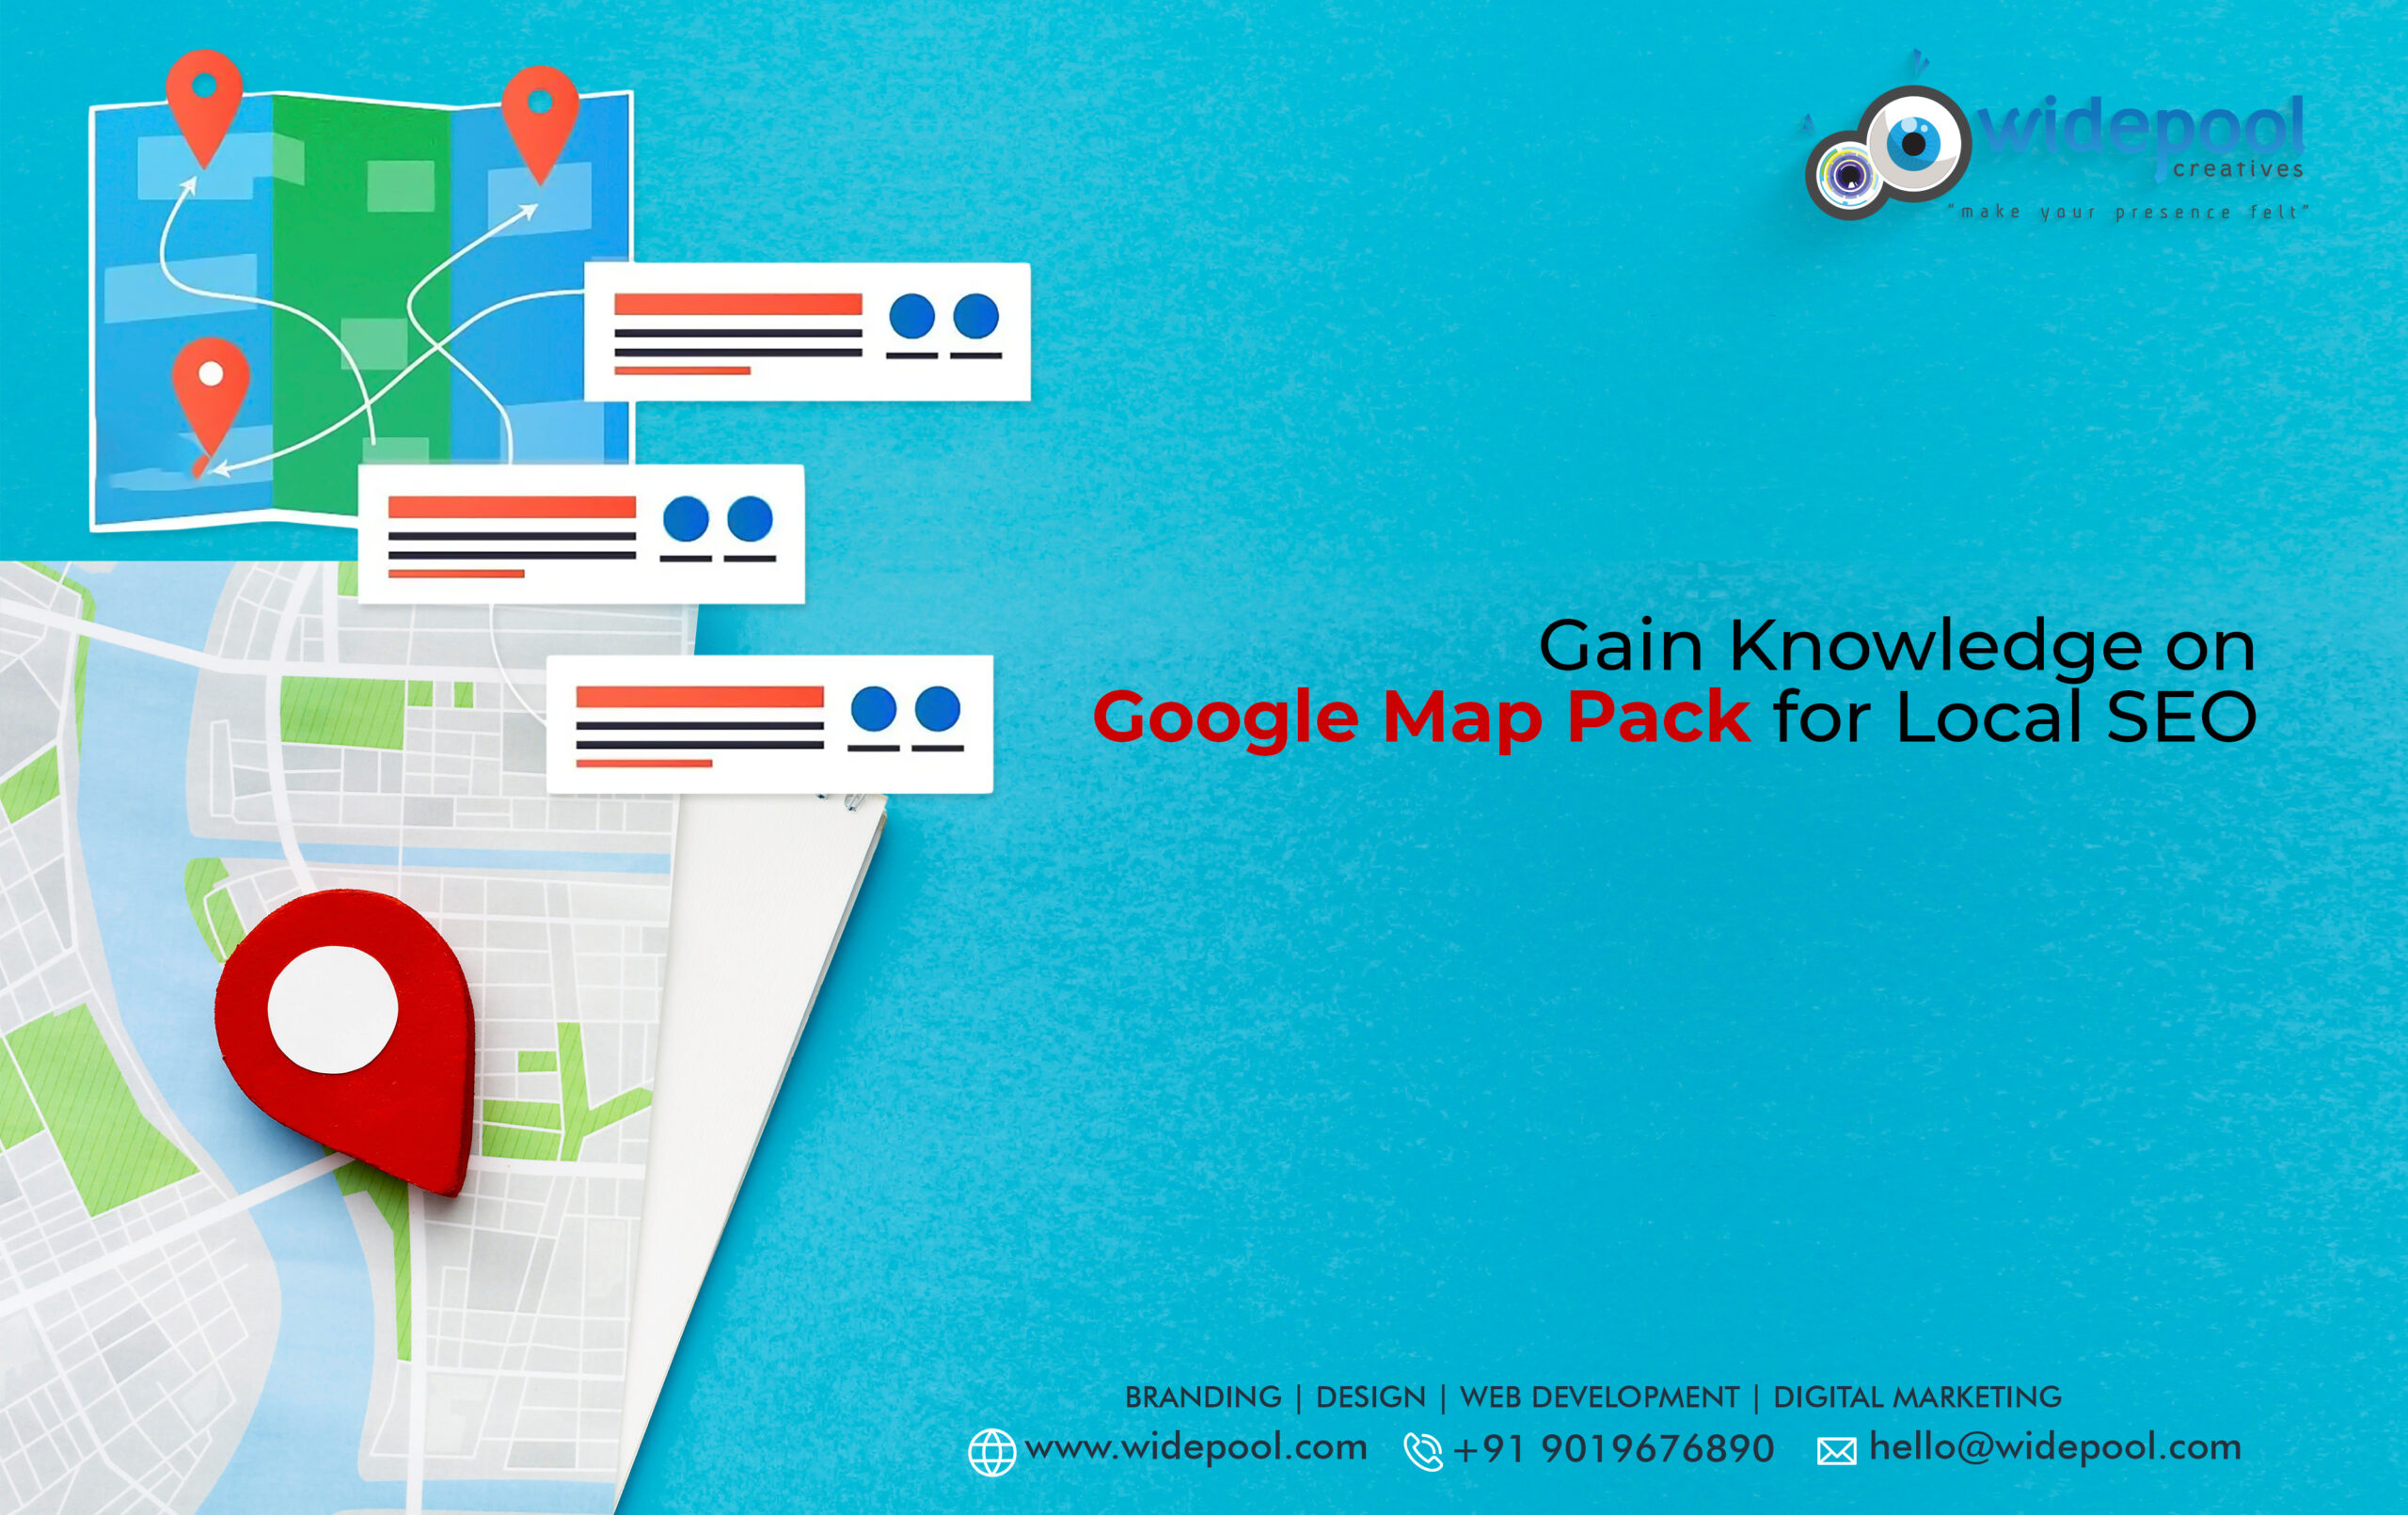 Gain Knowledge on Google Map Pack for Local SEO